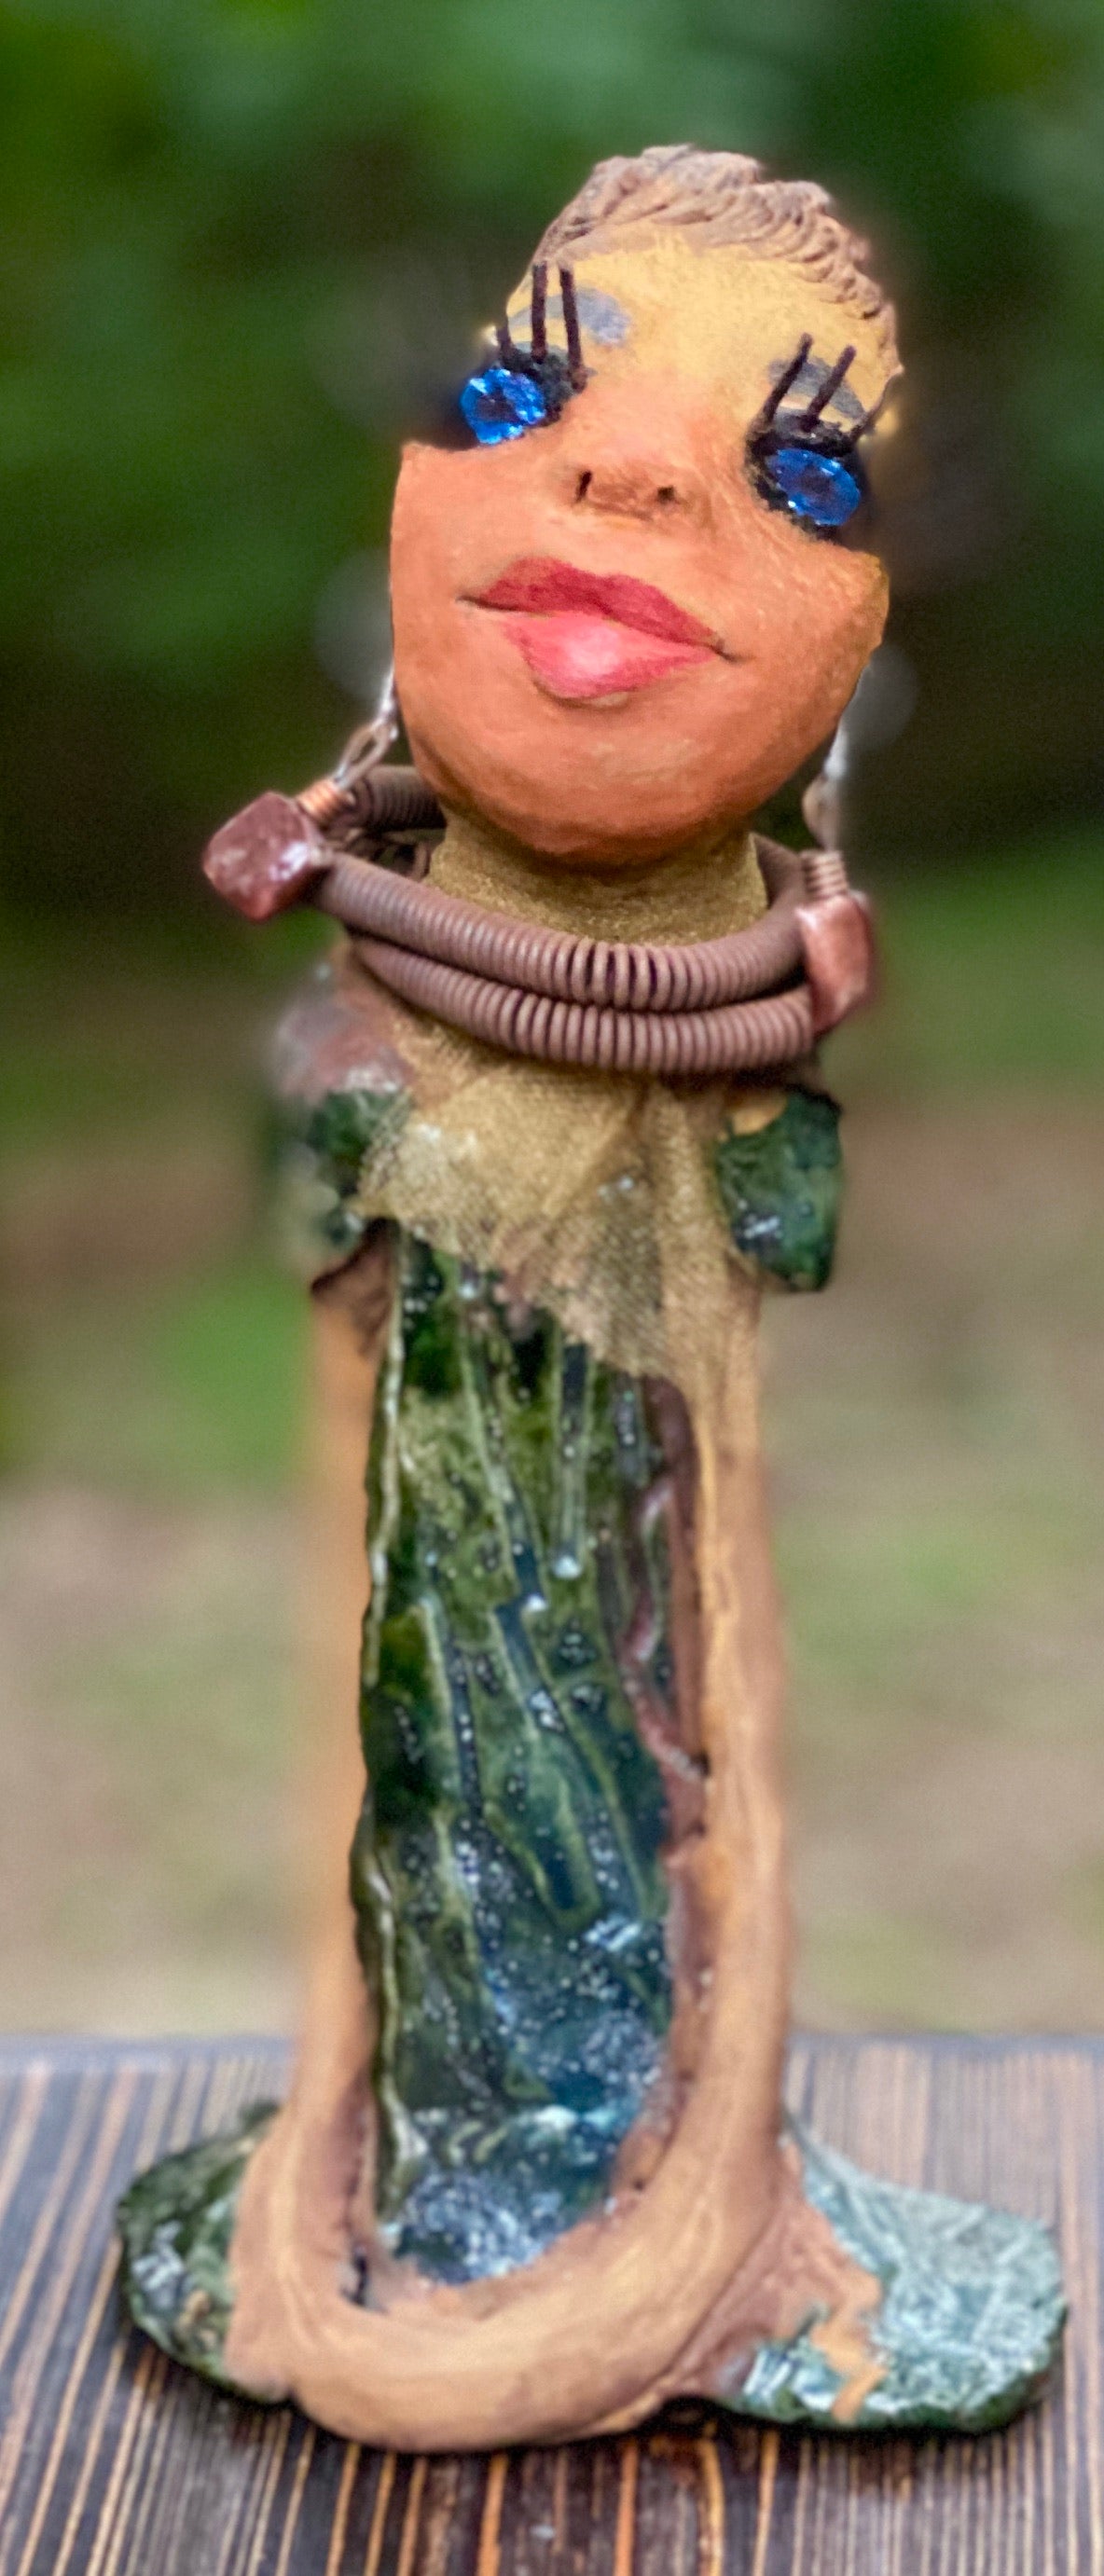 Meet Catera! Catera stands 10" x 4" x 4" and weighs 2.7 lbs. She has a lovely honey brown complexion with  reddish brown lips. She has a braided hairstyle.  Catera has a colorful metallic green antique copper glazed dress. She wears a yellow bead necklace with raku beads. Her long loving arms are resting at her side. With long lashes and eyes wide opened, Catera has hopes of finding a new home.  